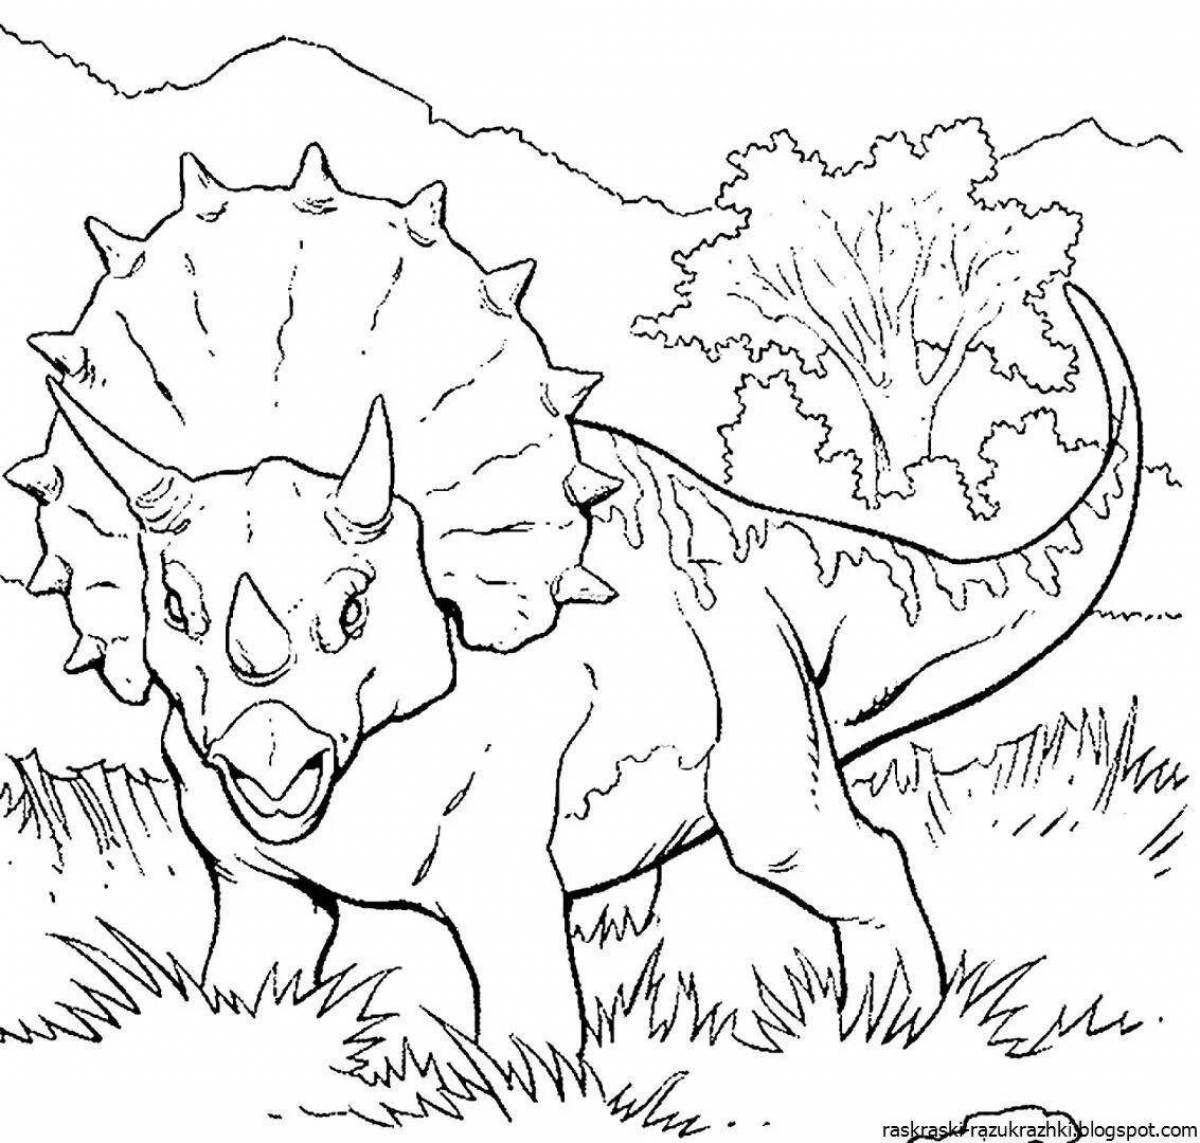 Wonderful dinosaurs coloring for boys 5-7 years old